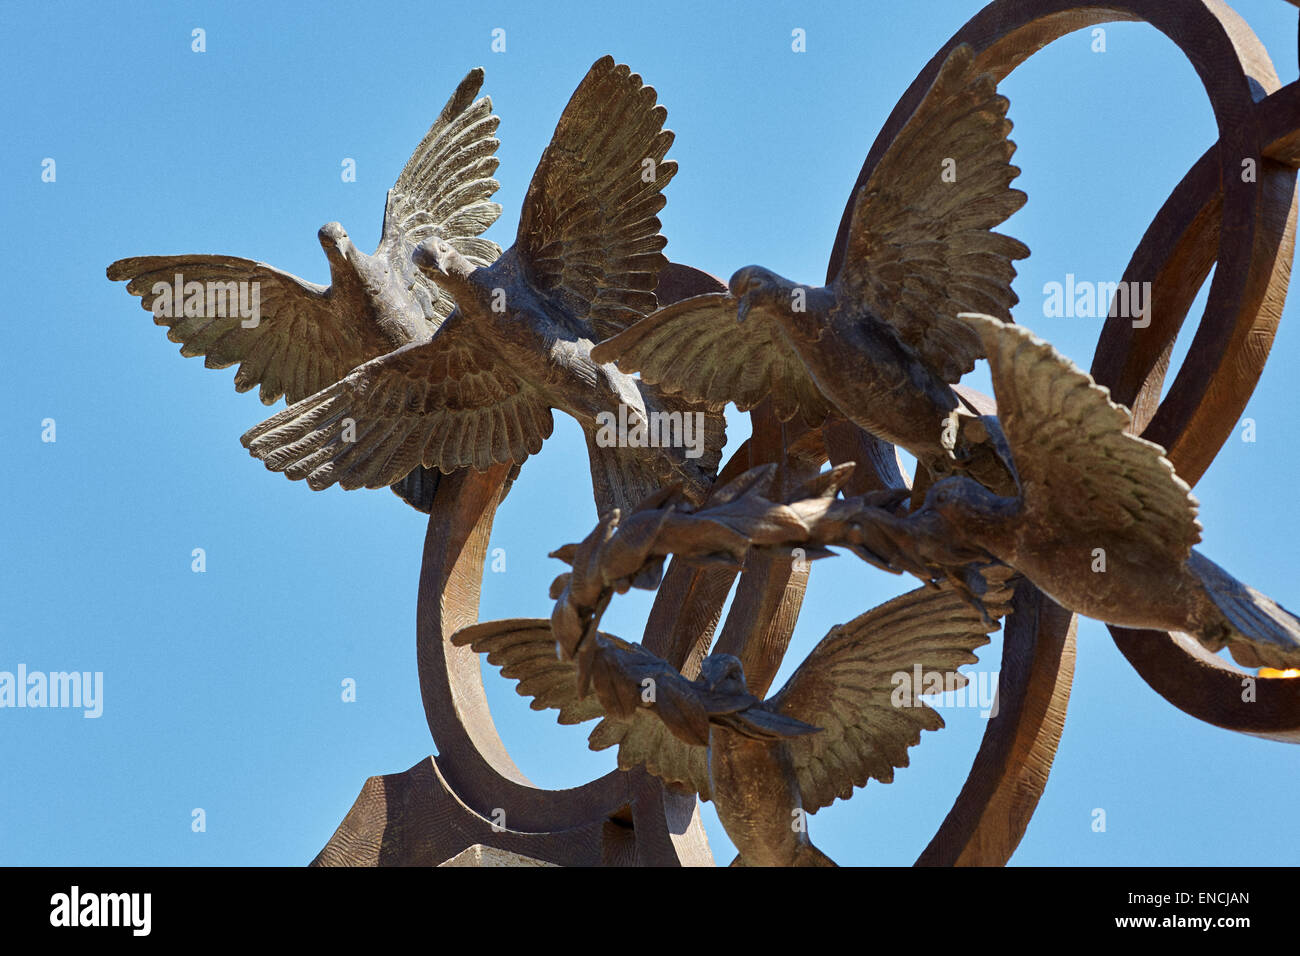 Downtown Atlanta in Georga USA   Picture: Statue of Pierre de Coubertin and Olympic Rings, doves at Centennial Olympic Park Stock Photo